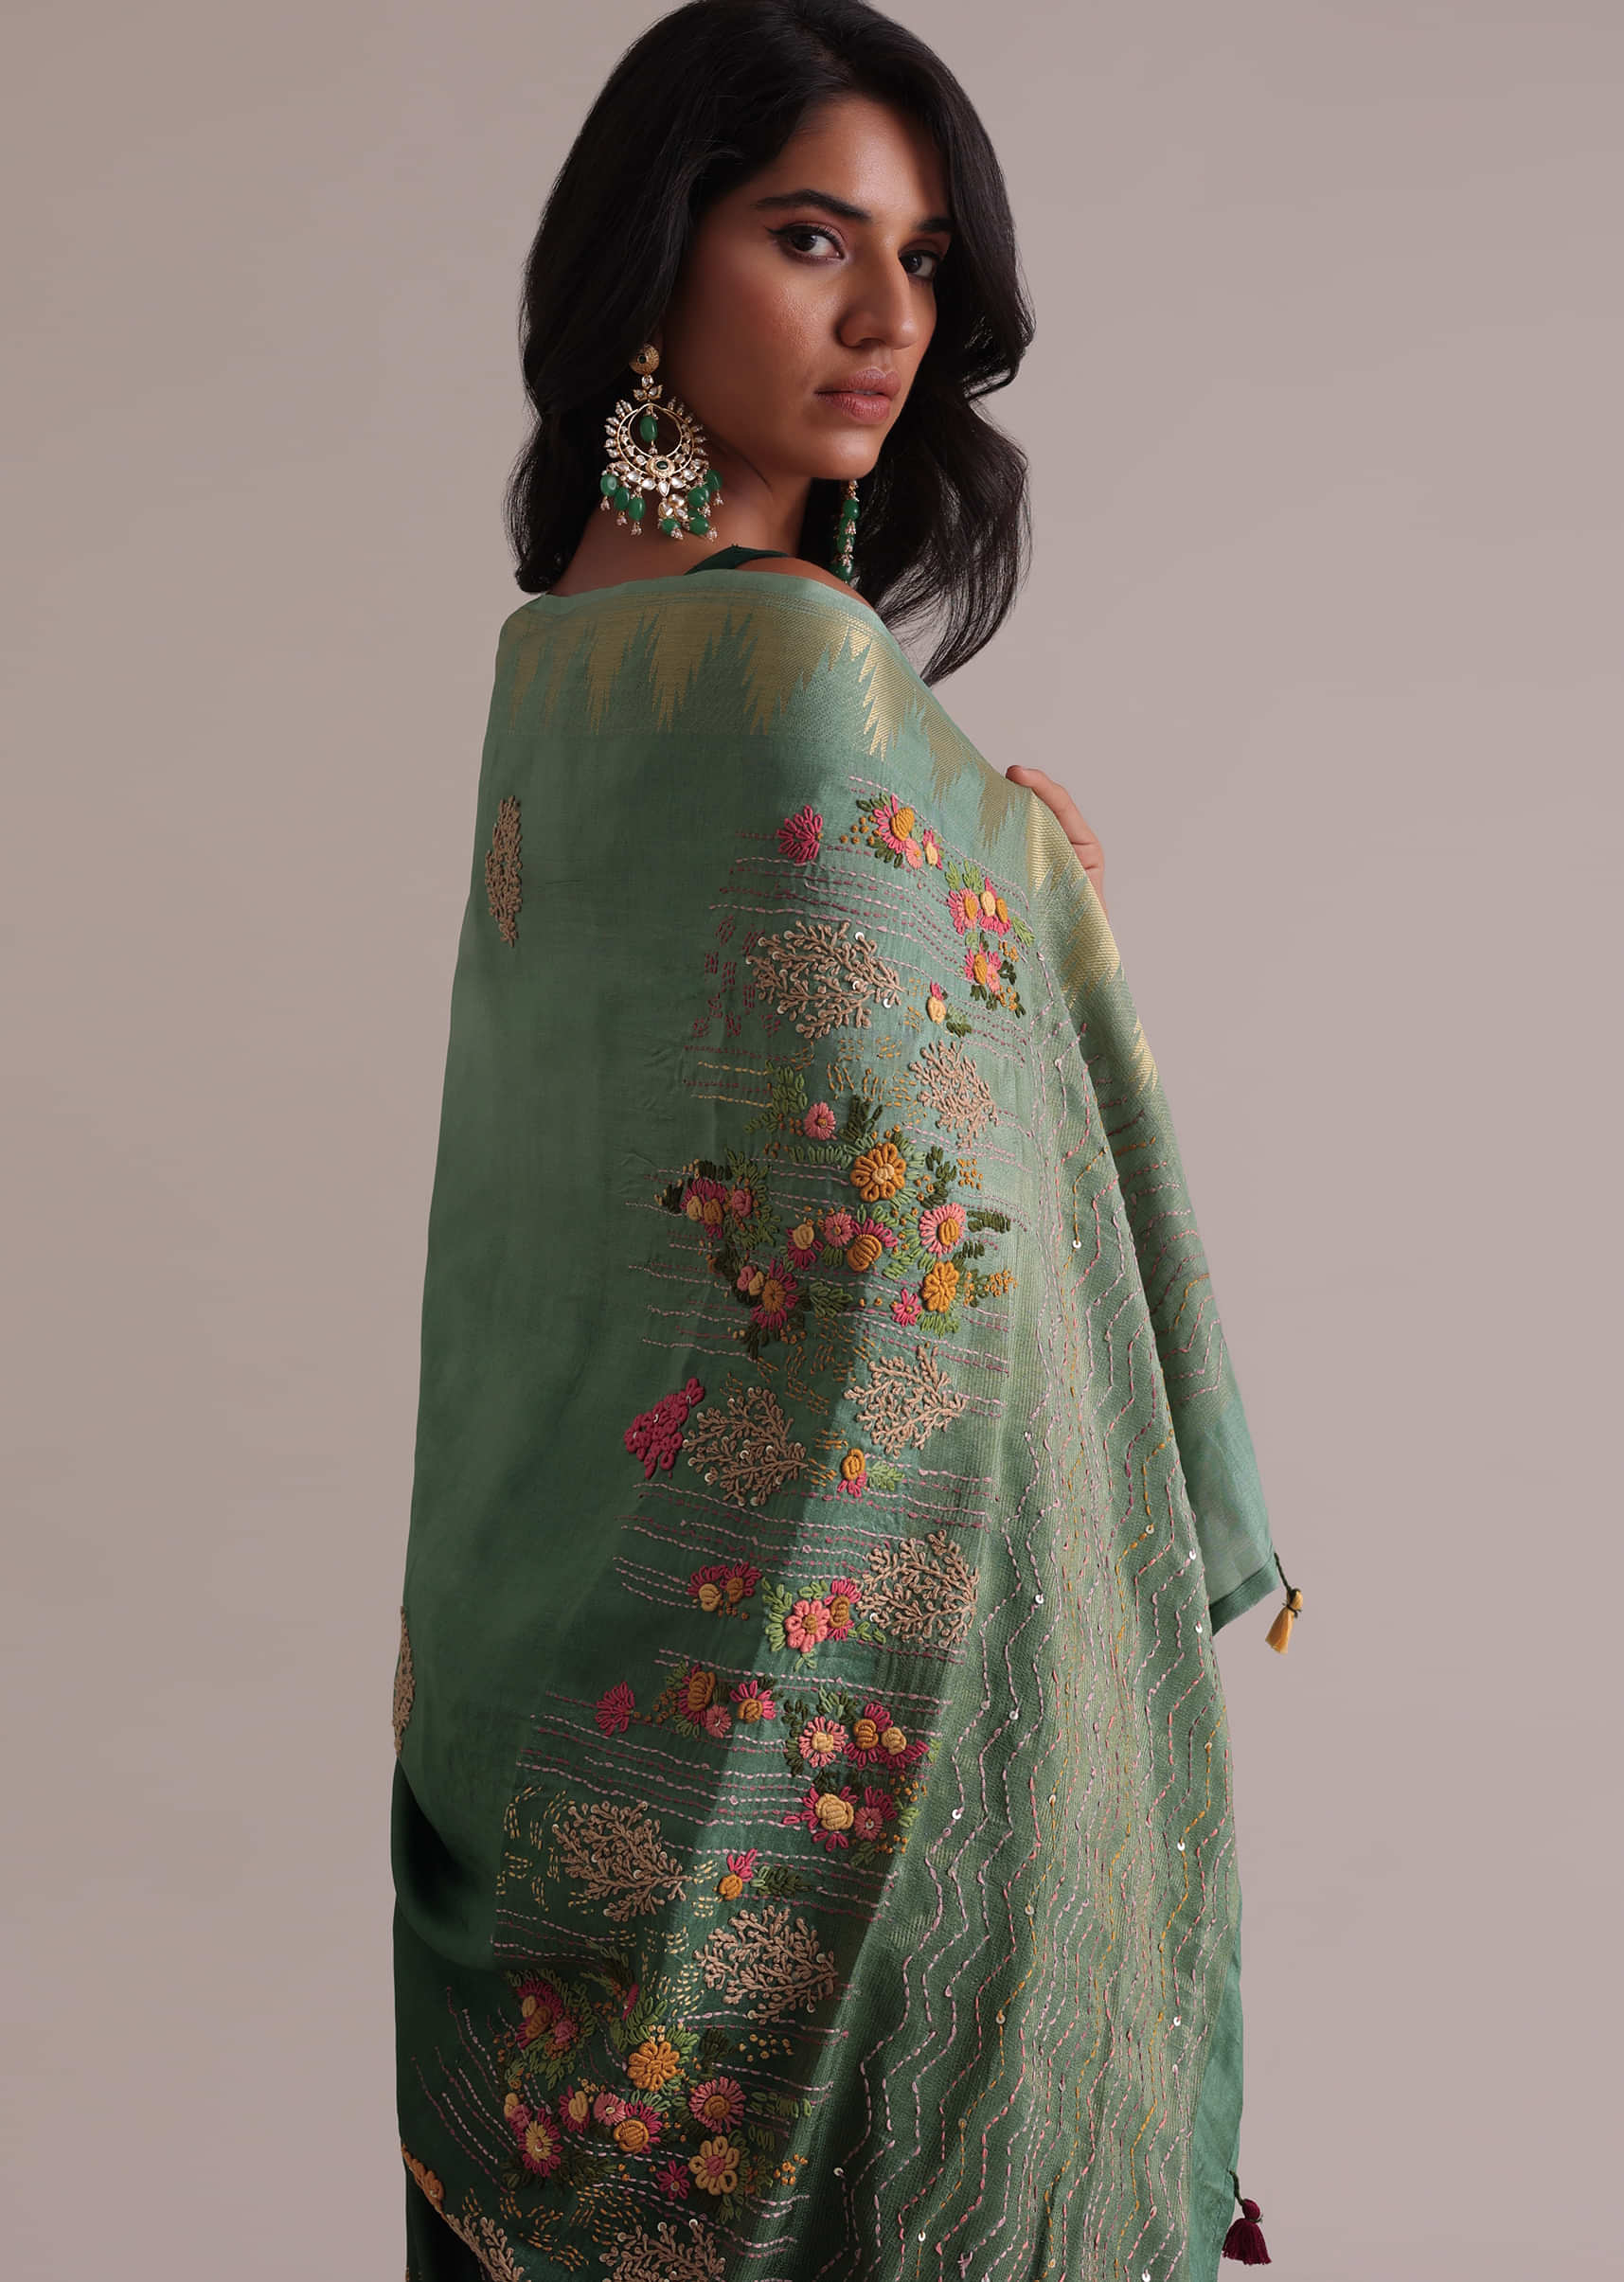 Dual-Tone Green Ombre Saree With Resham 3D Bud And Threadwork Embroidery In Dola Crepe